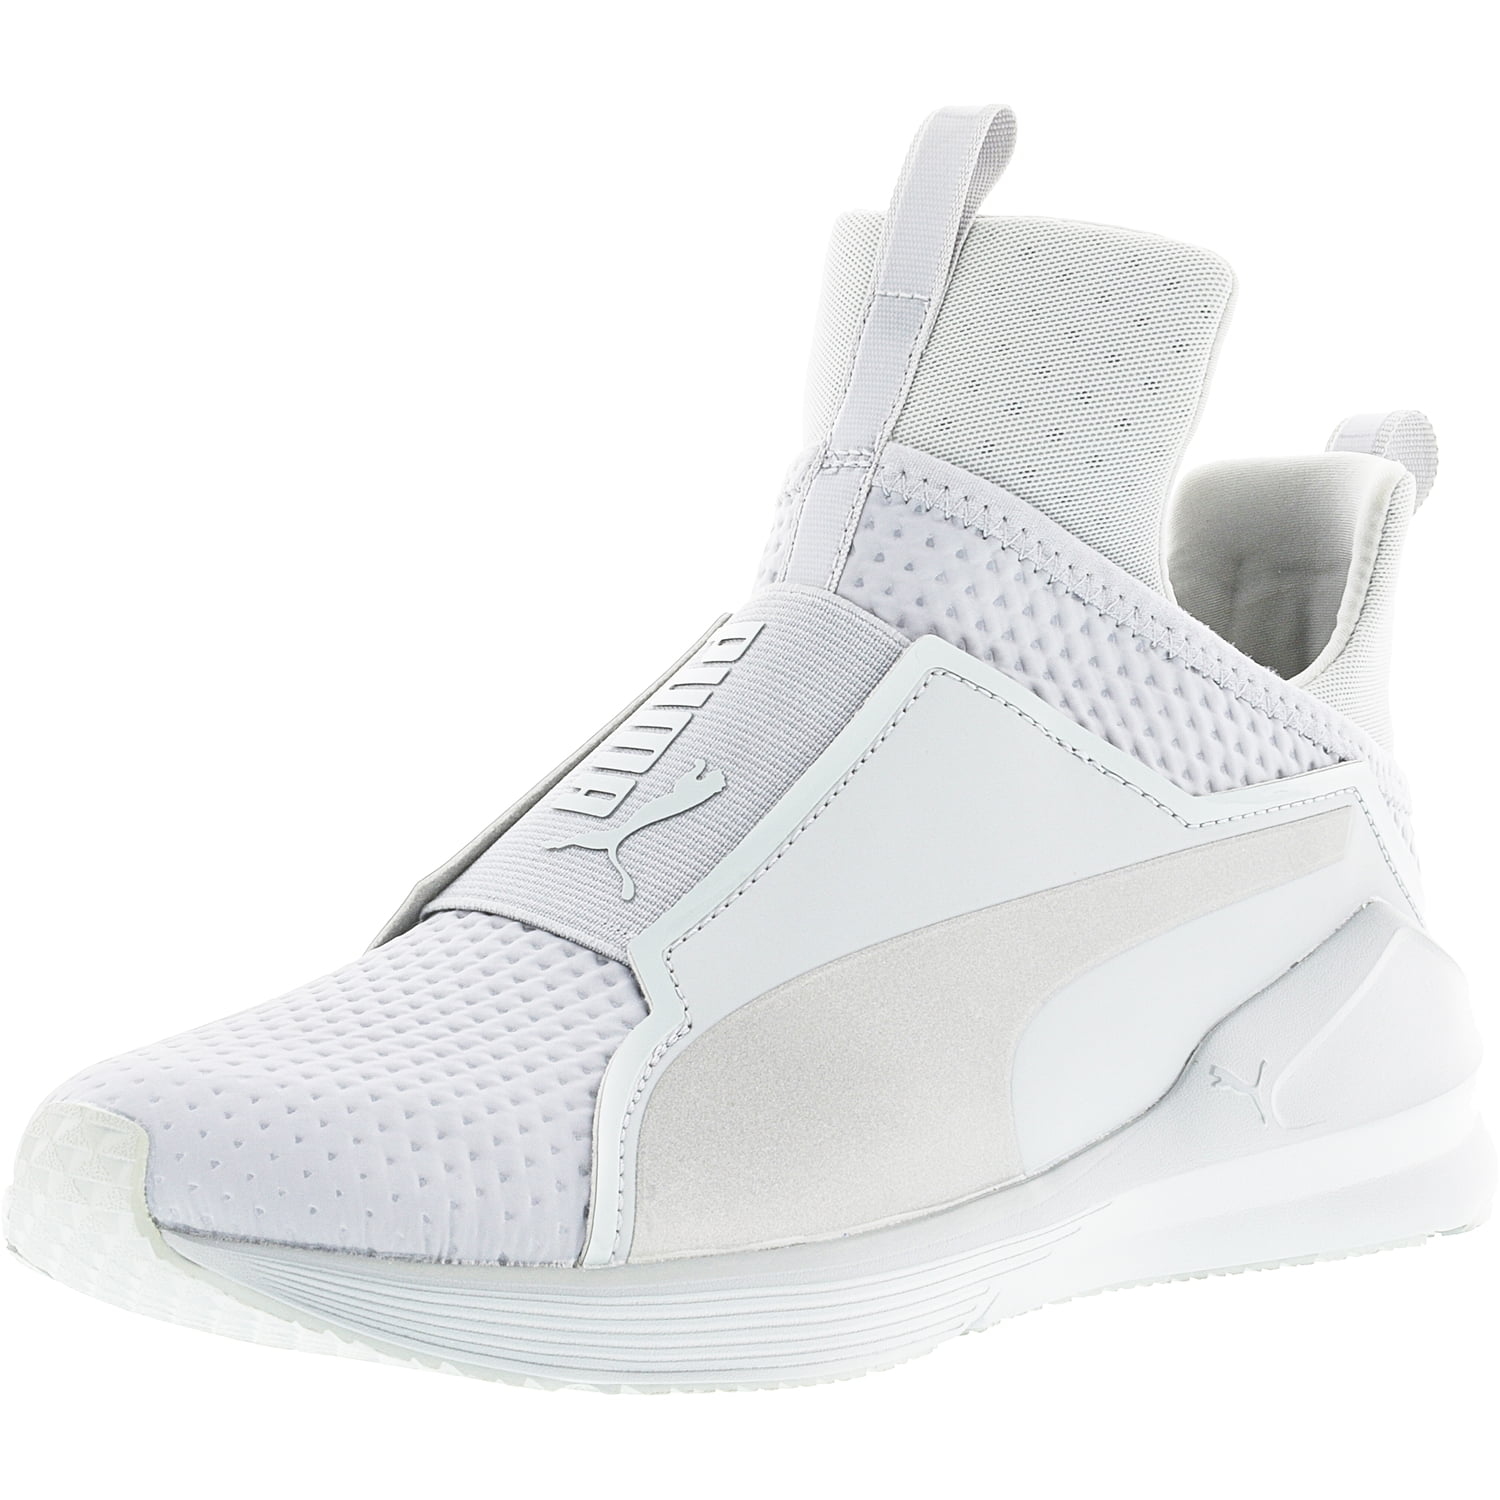 Puma Women's Fierce Quilted Quarry / Silver Ankle-High Training Shoes ...